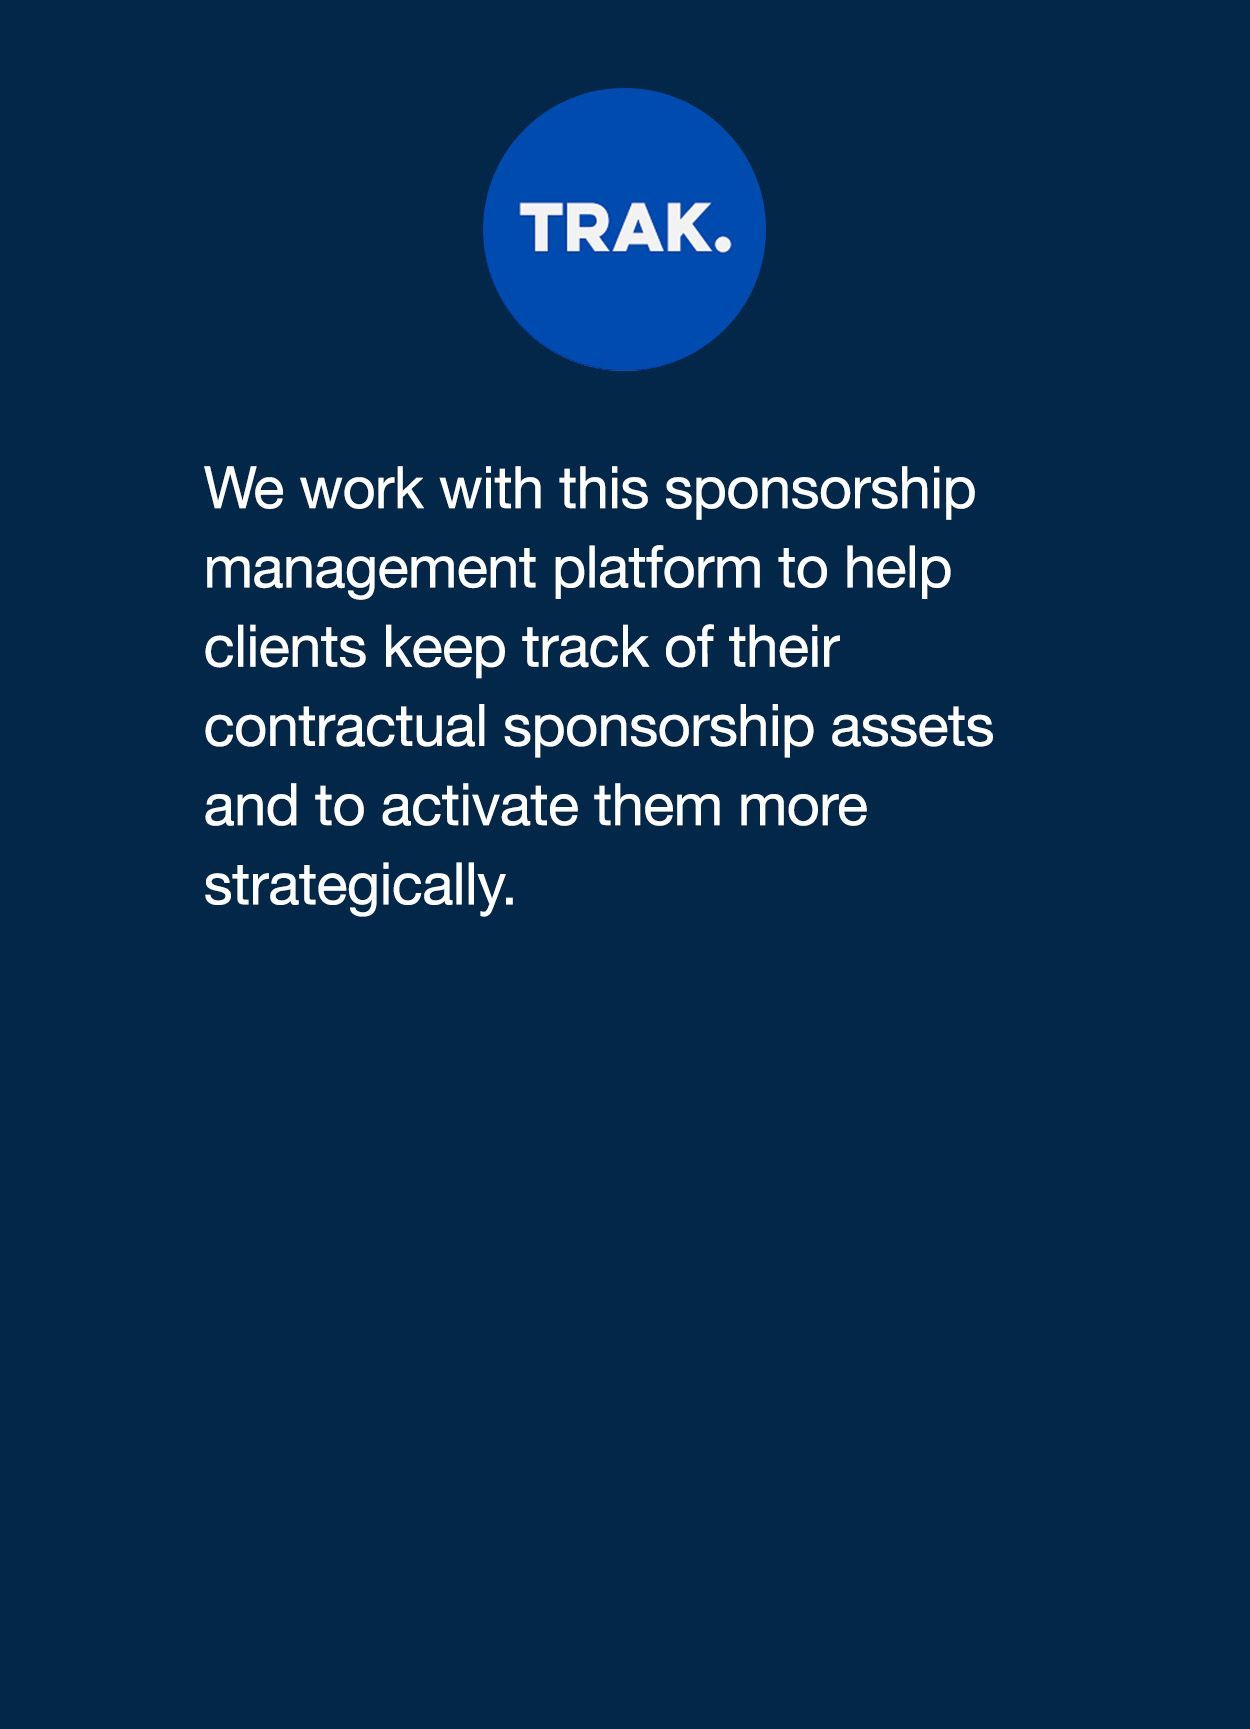 We work with this sponsorship management platform to help clients keep track of their contractual sponsorship assets and to activate them more strategically.